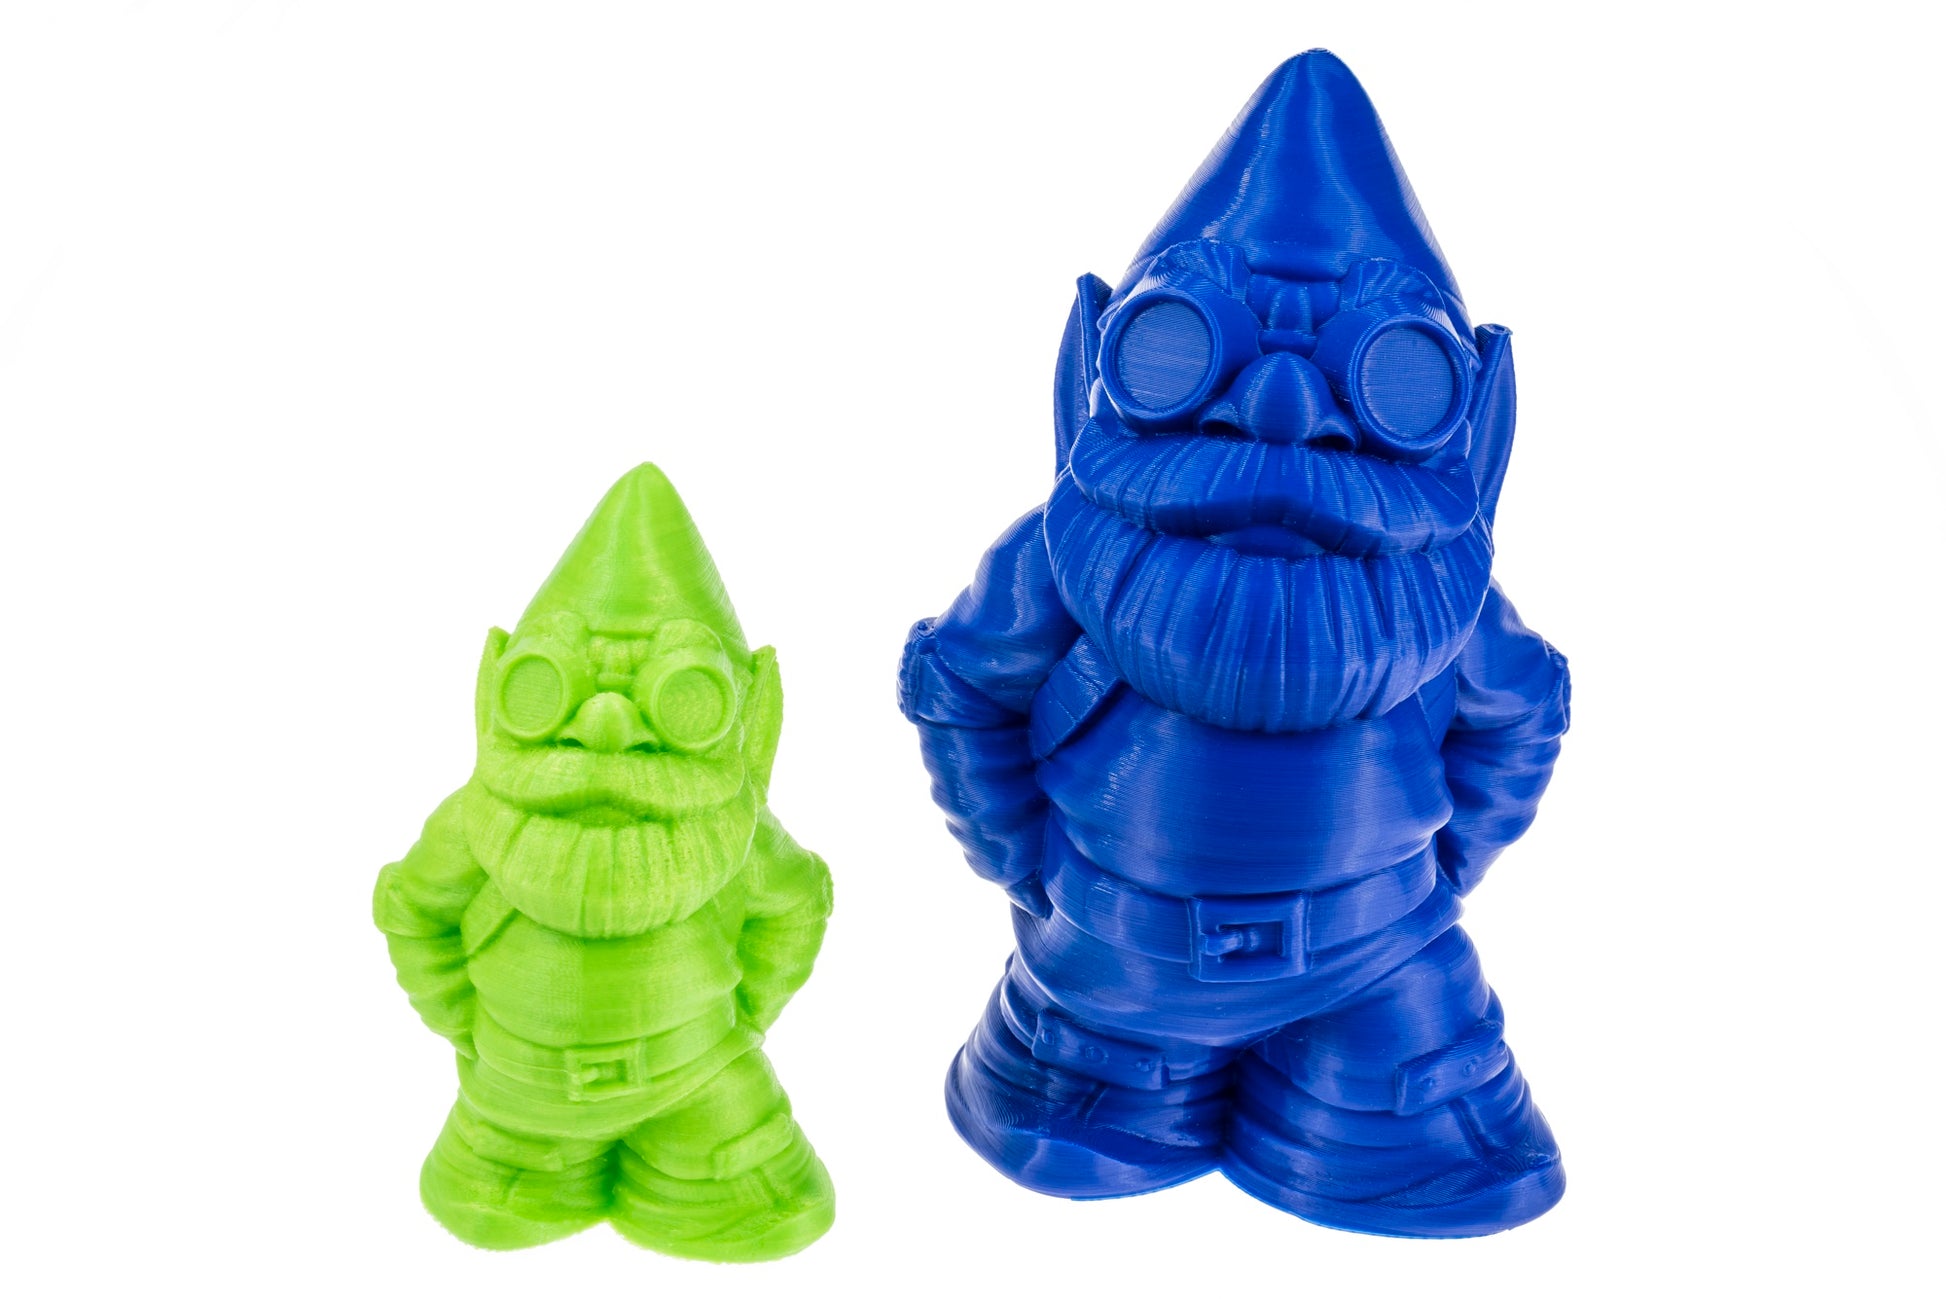 Two 3D printed gnomes showing light green and navy blue color options when printed